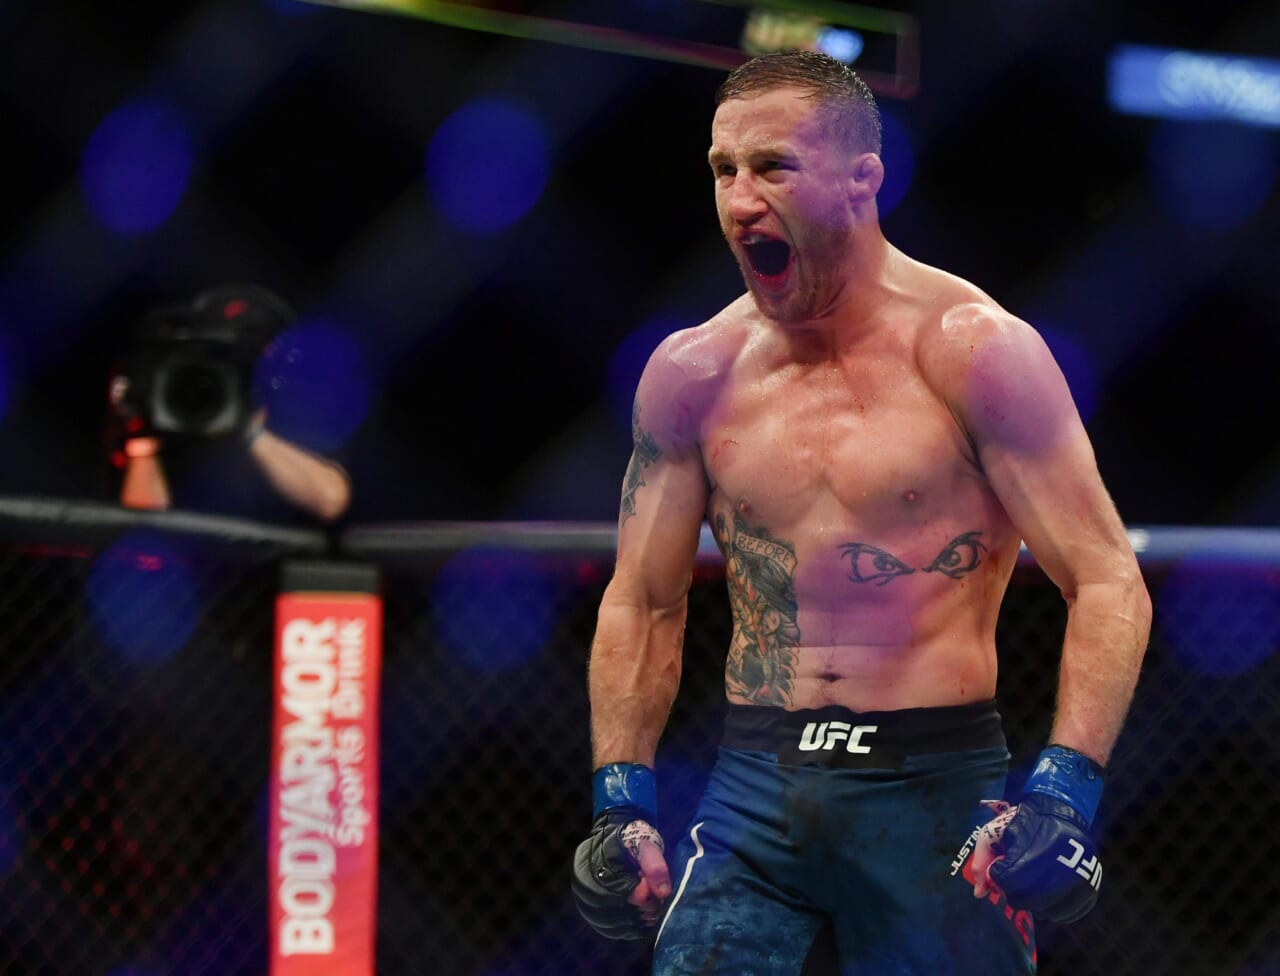 UFC’s Gaethje to Chandler: ‘There’s something about your face that just makes me want to punch you’